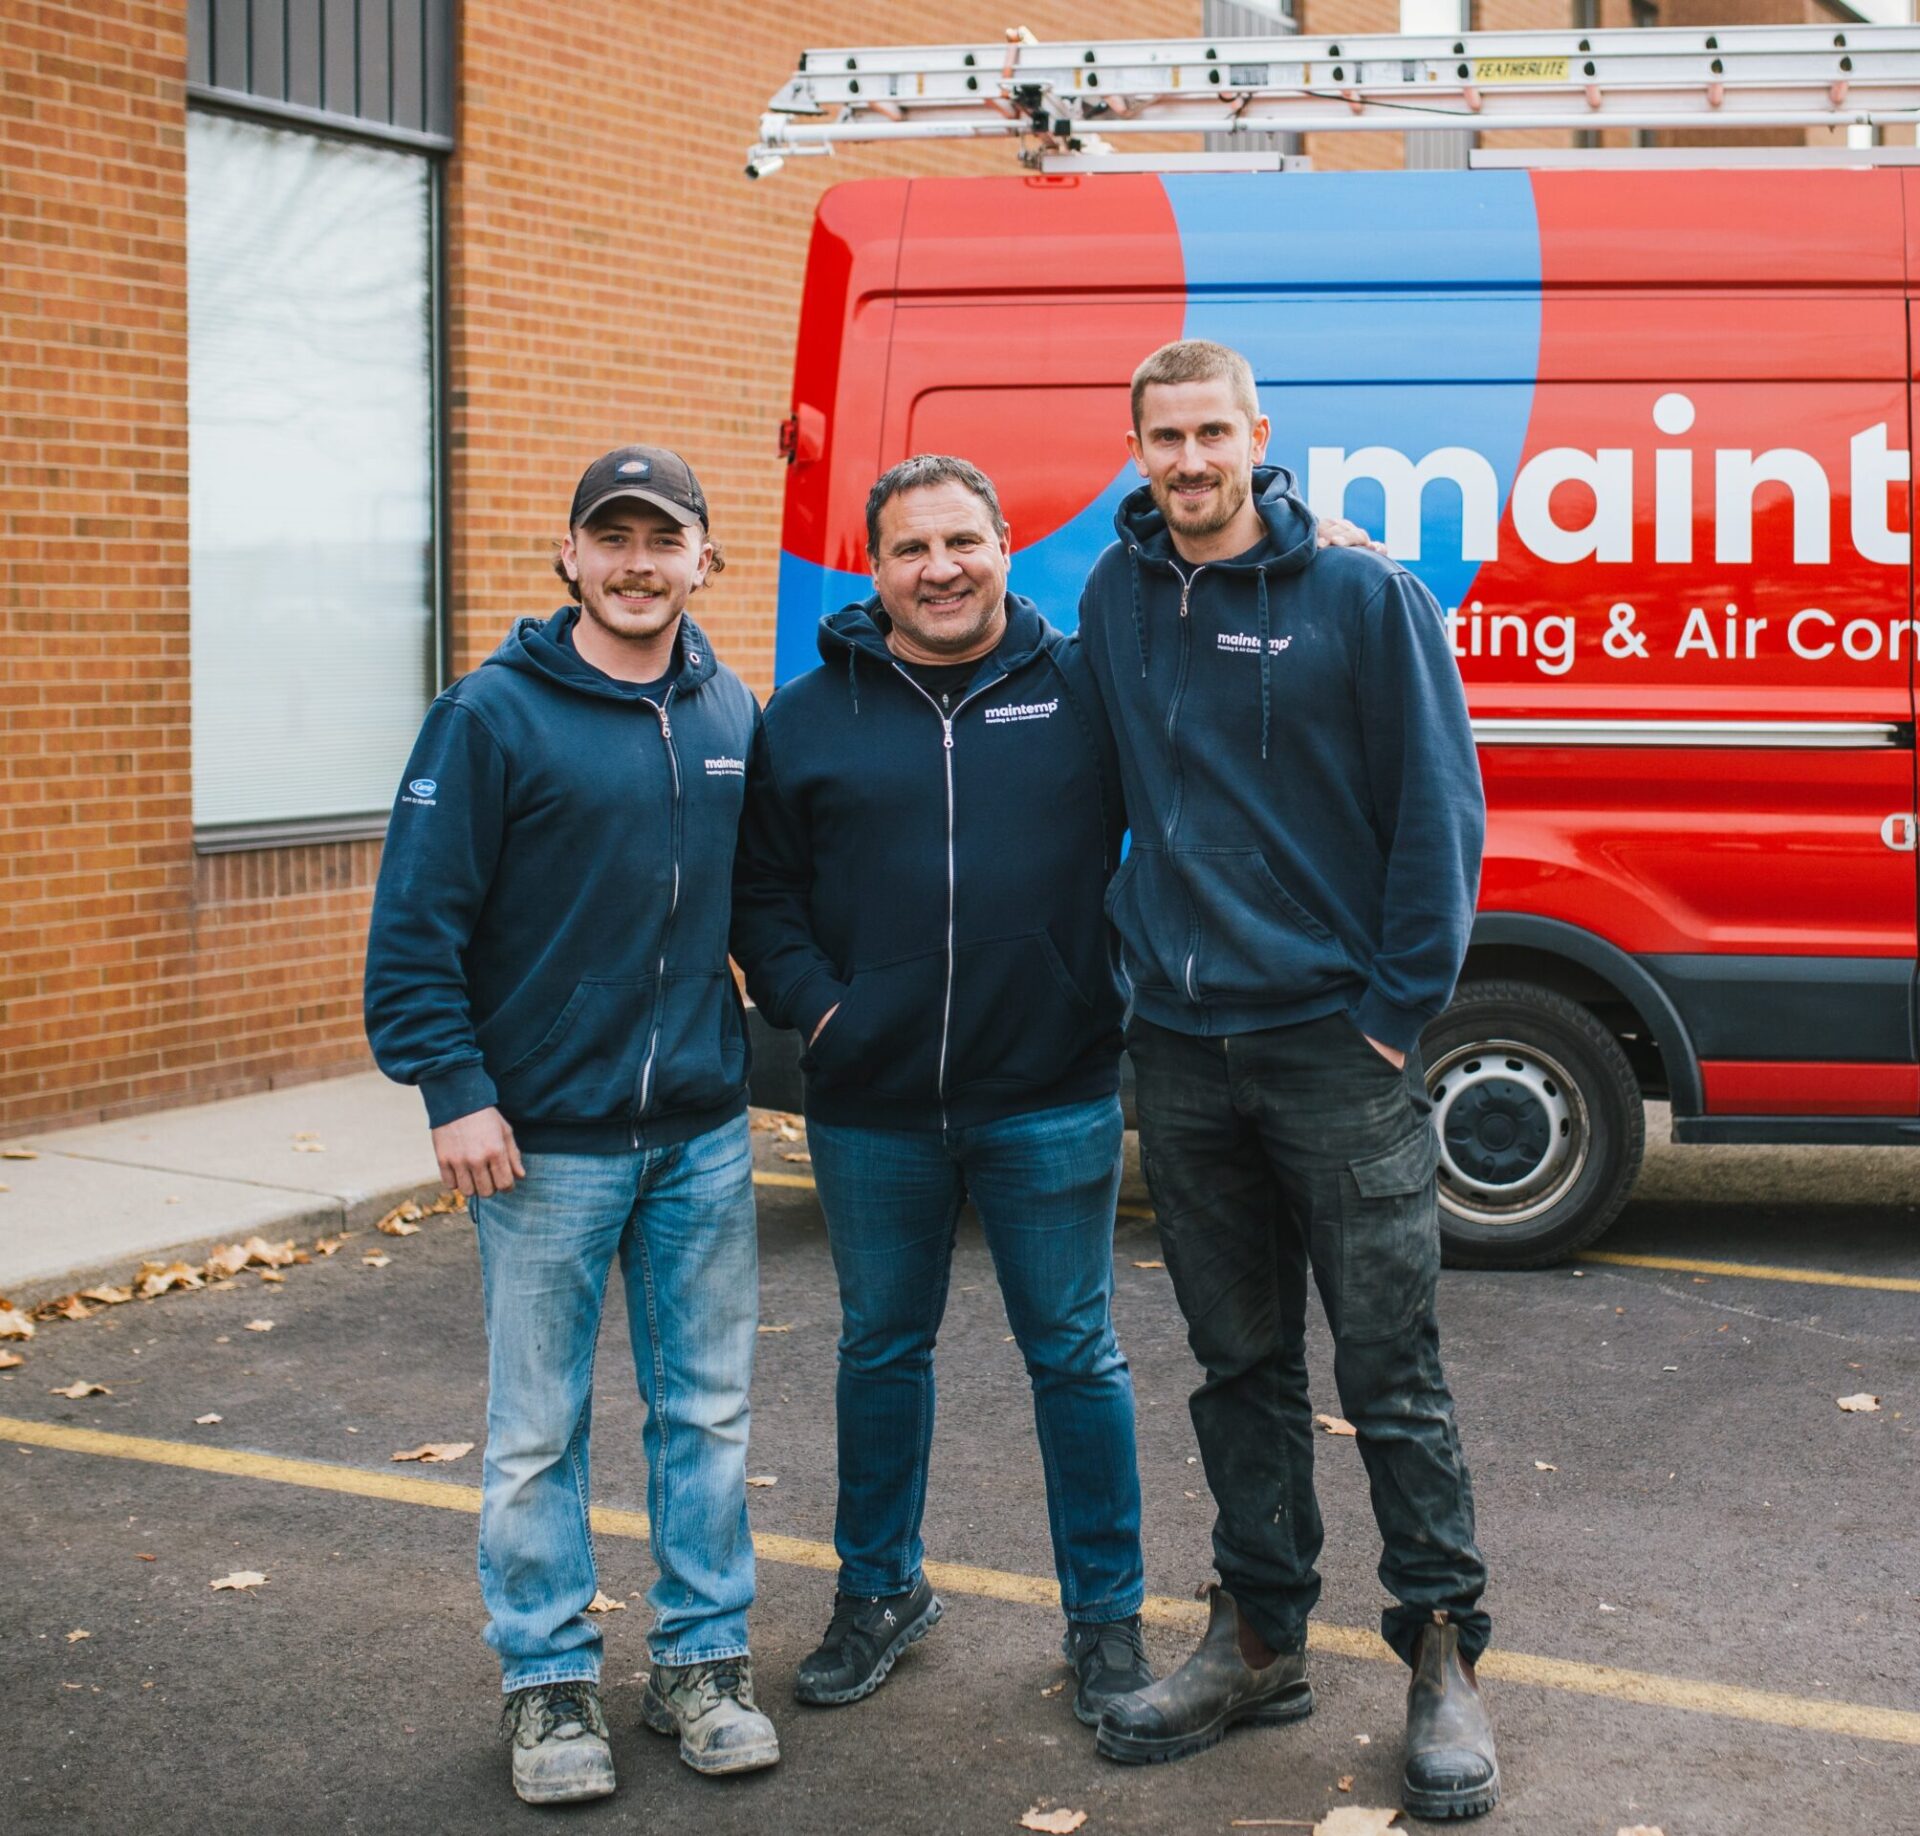 Three people wearing matching company jackets stand in front of a red service van with "maintenance" written on it, smiling for the camera.